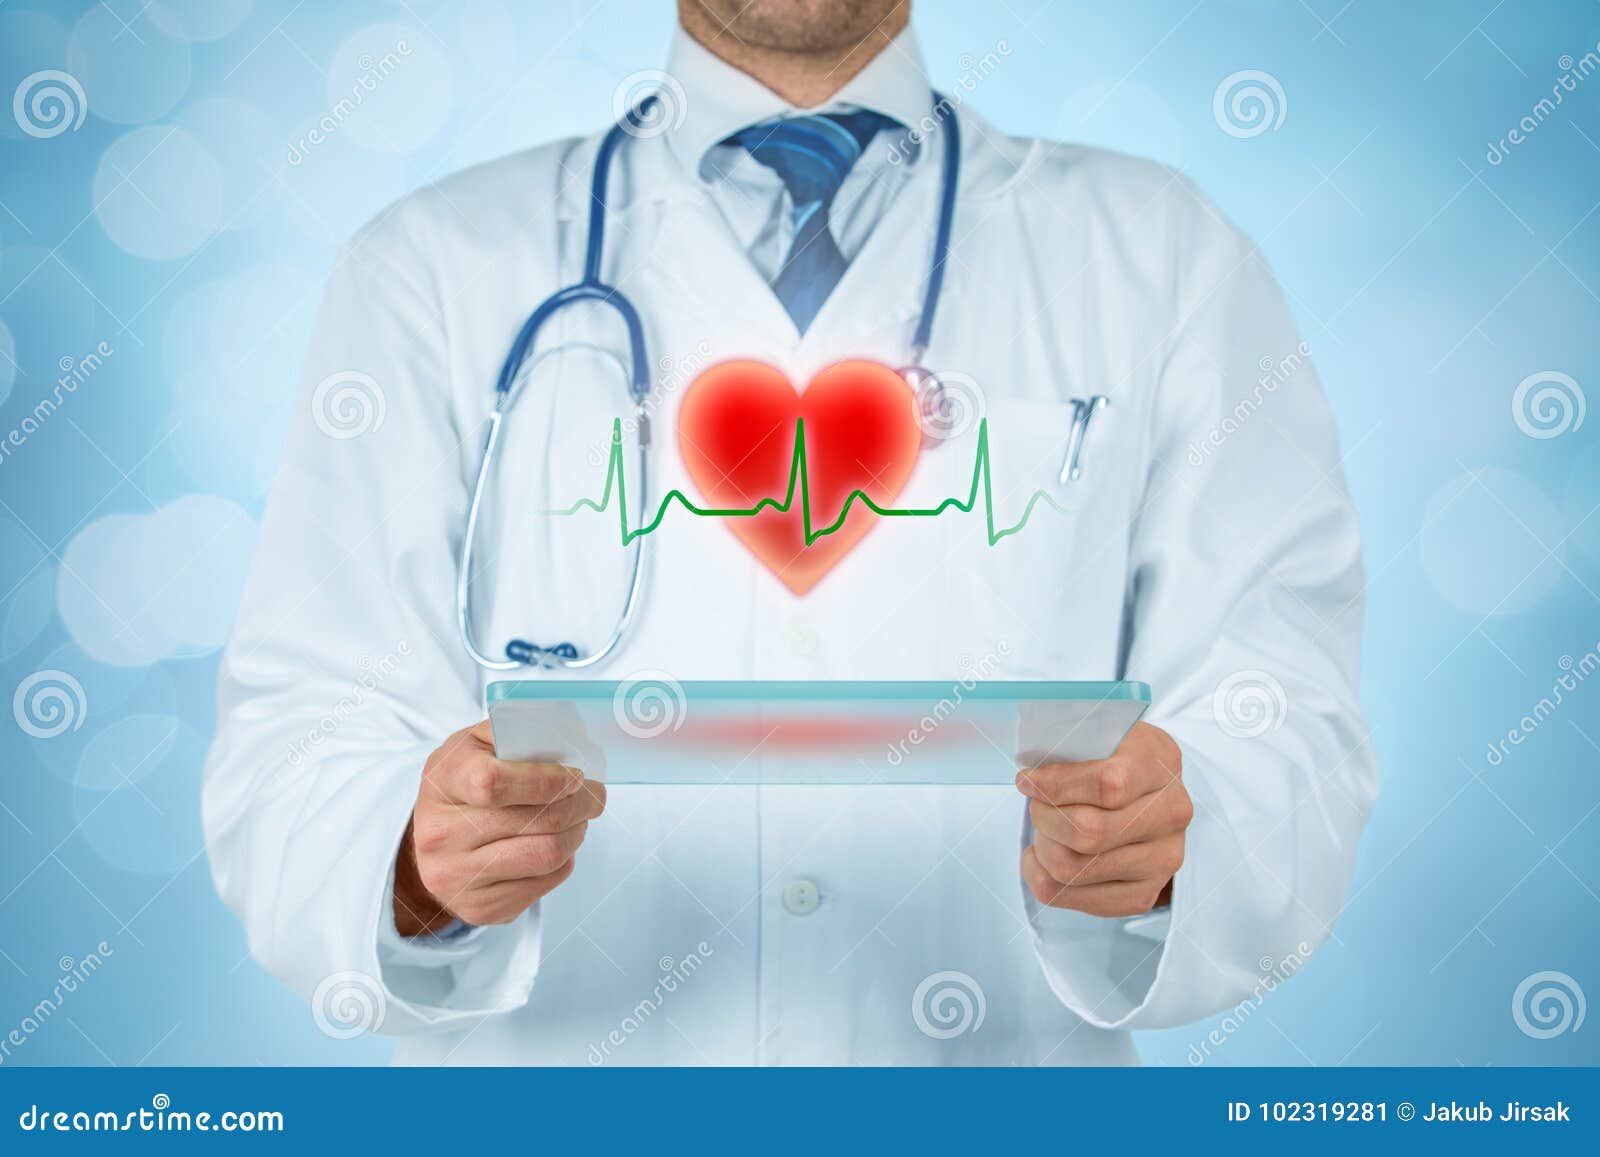 cardiologist and healthcare 